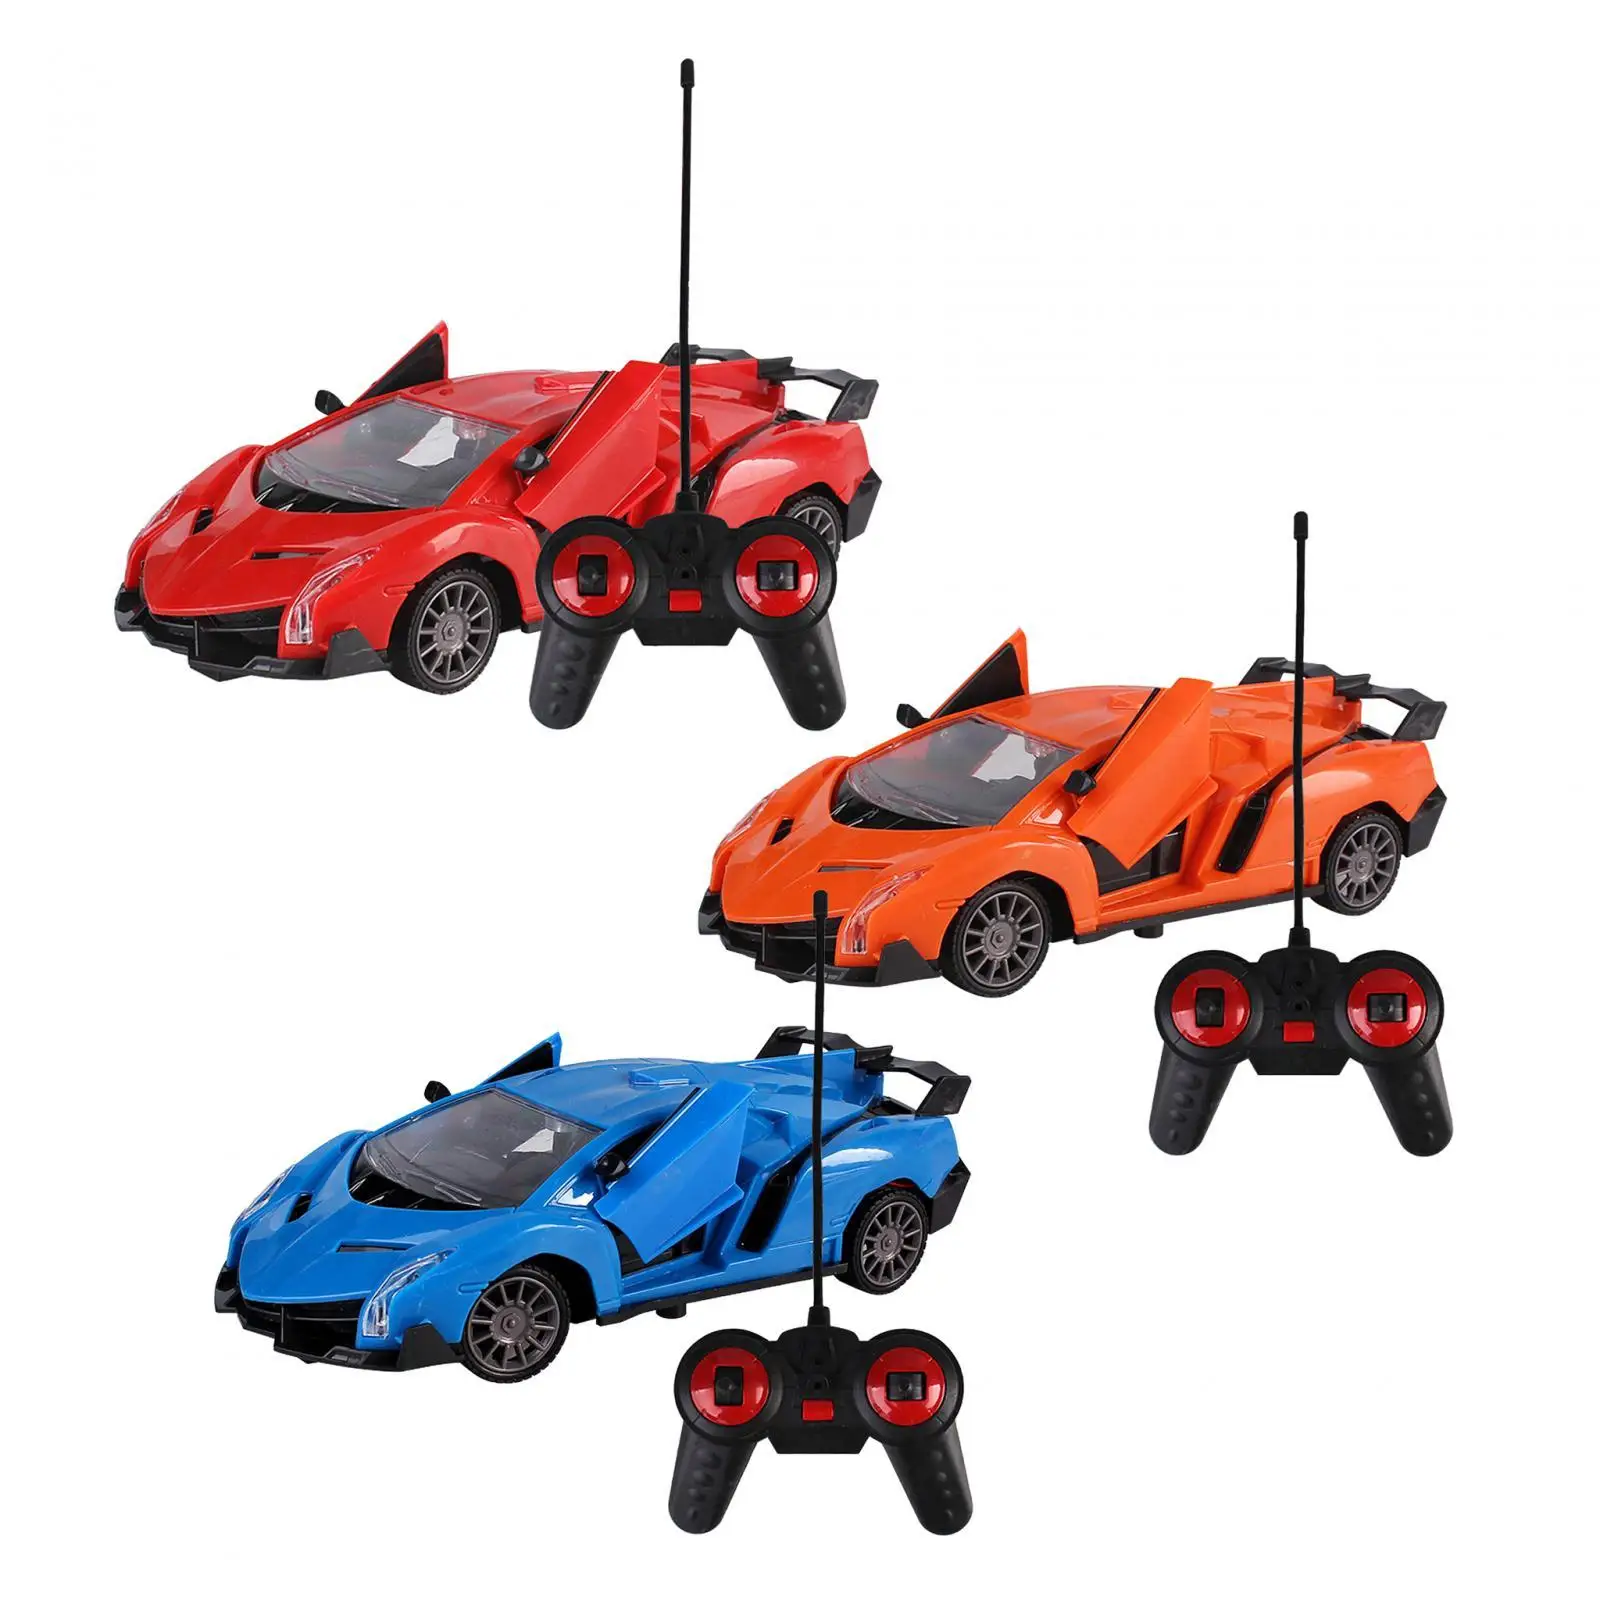 sport Hobby Toy High Speed Collectible Model Vehicle for Indoor Gift